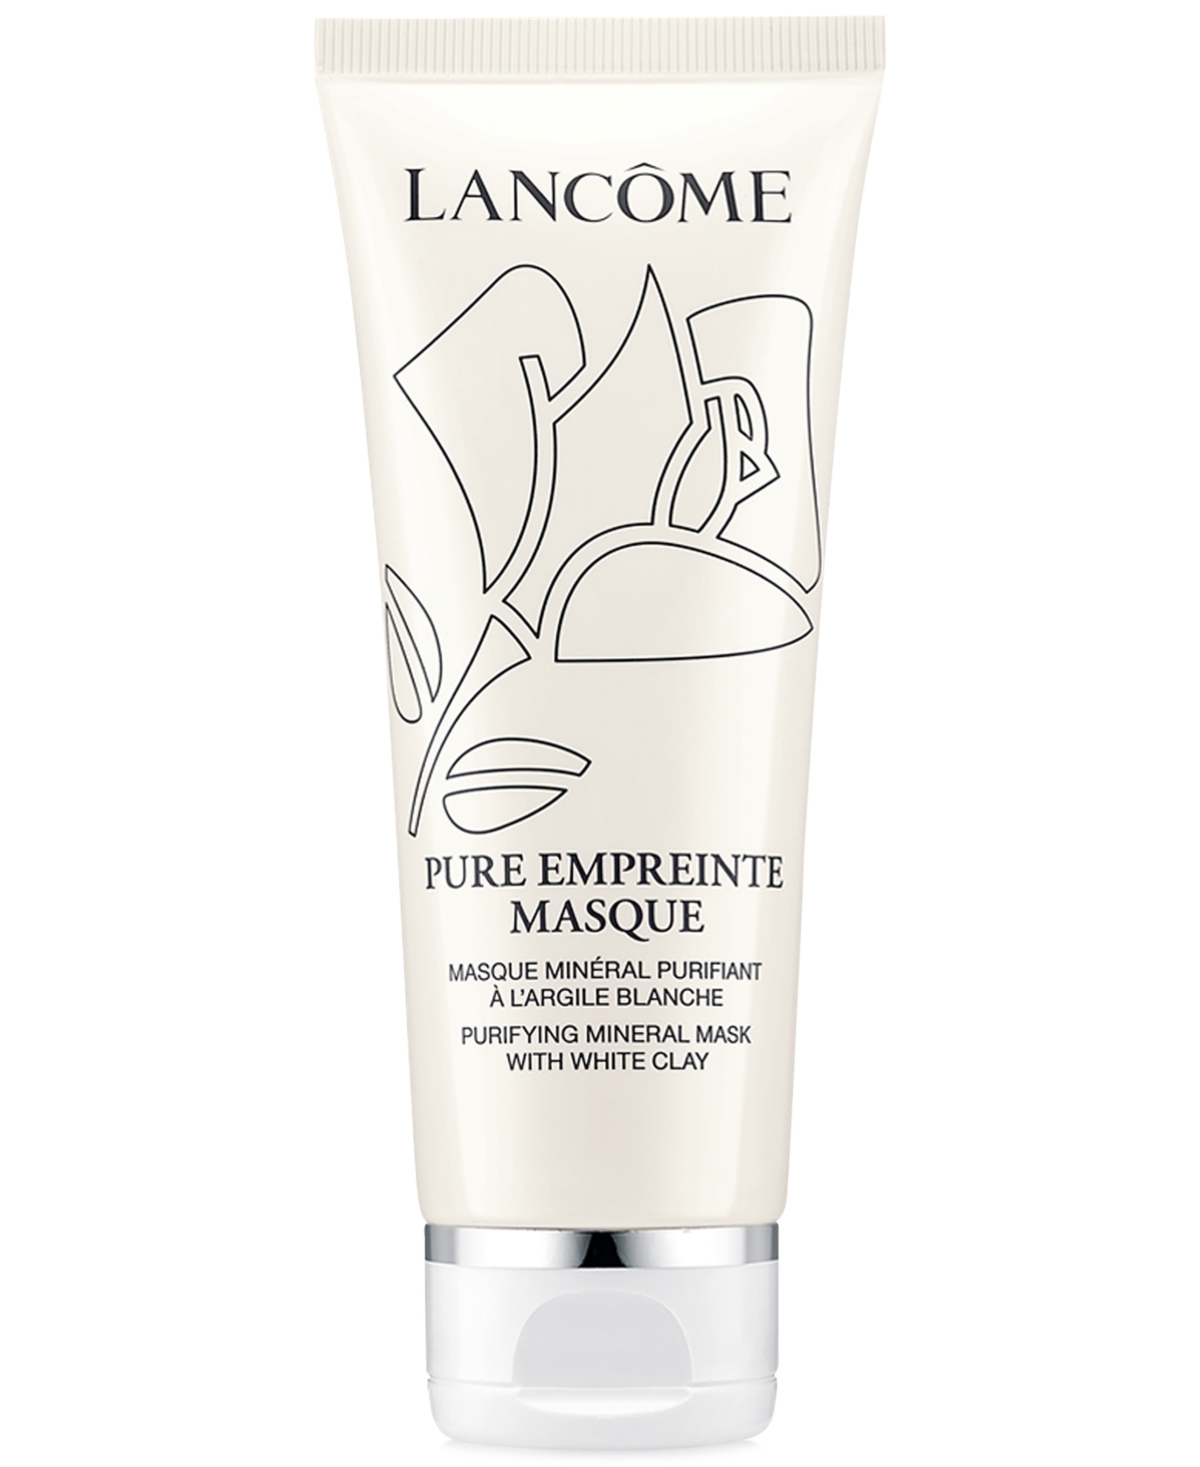 EAN 3147758864373 product image for Lancome Pure Empreinte Masque Purifying Mineral Mask with White Clay, 3.38oz | upcitemdb.com